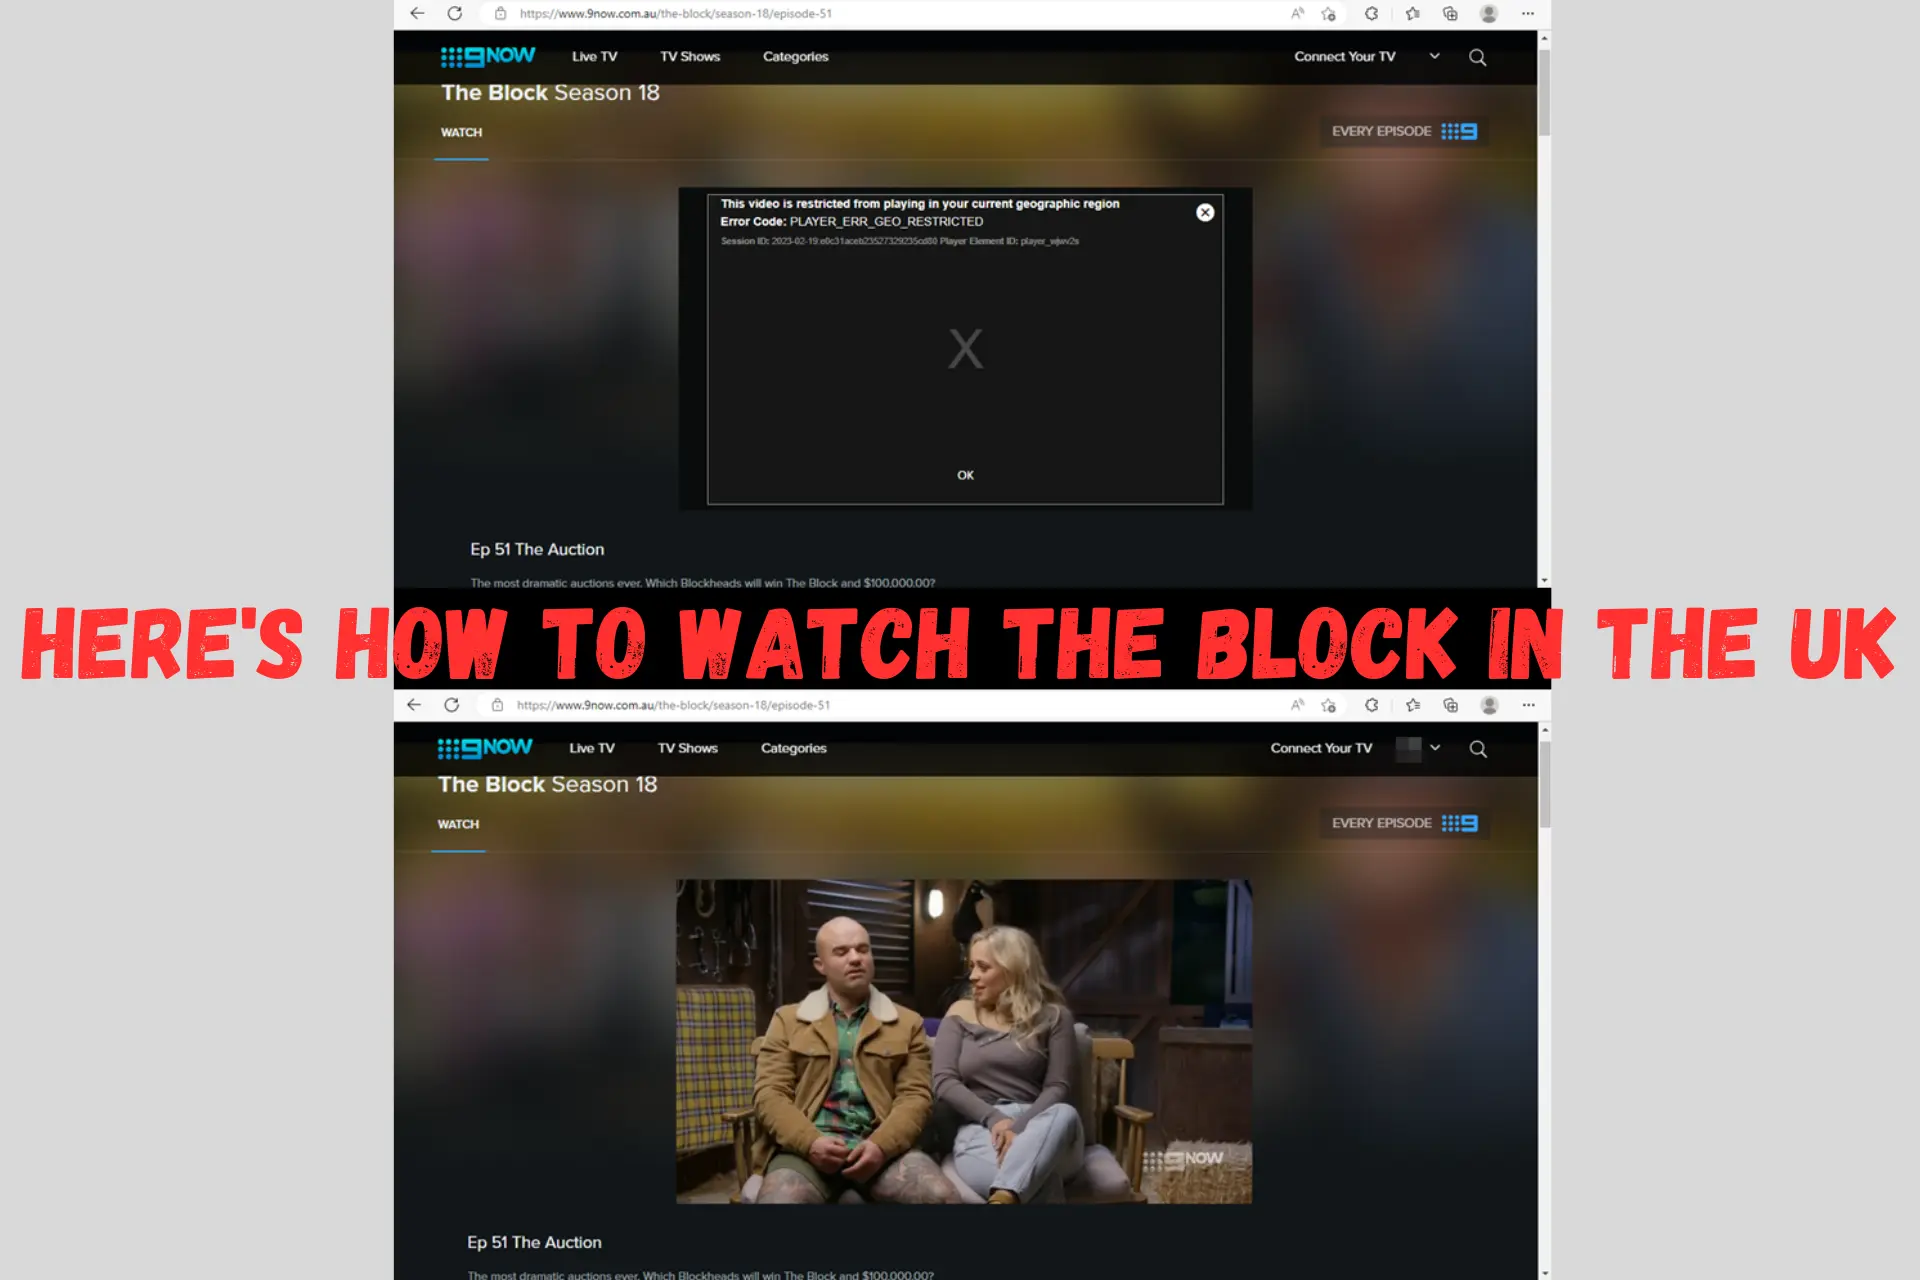 How to Watch The Block in the UK